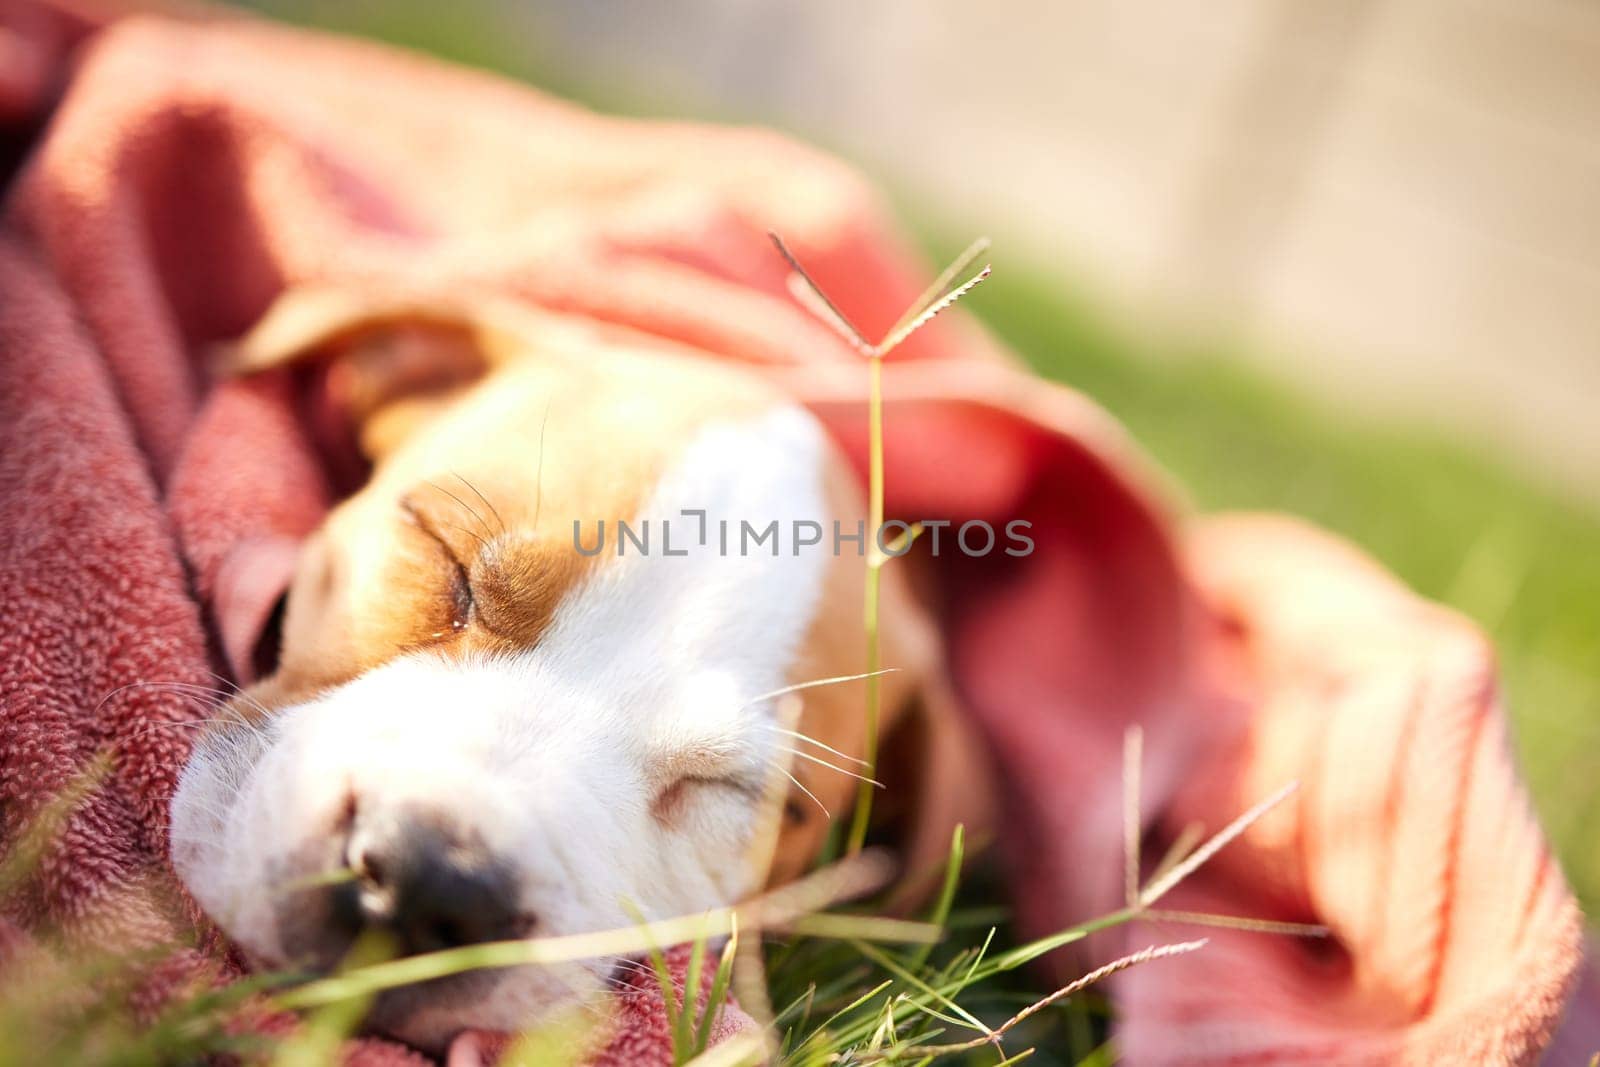 Grass, dog and sleeping puppy in blanket for adoption, rescue shelter and animal care. Cute, pets and adorable pitbull outdoors for tired, resting and relax in environment, lawn and nature in morning by YuriArcurs